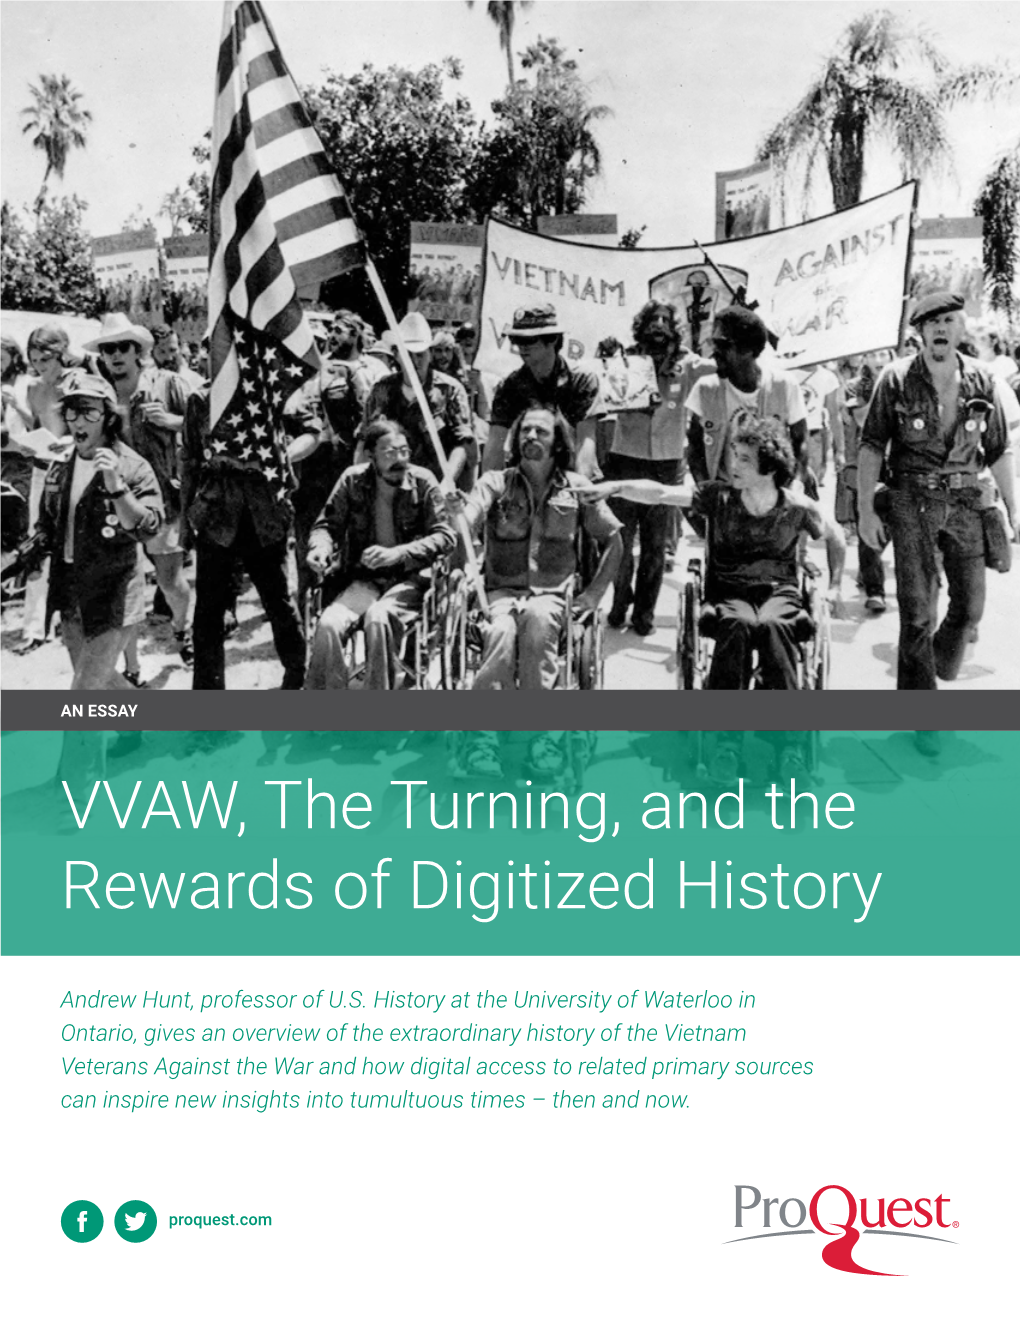 VVAW, the Turning, and the Rewards of Digitized History